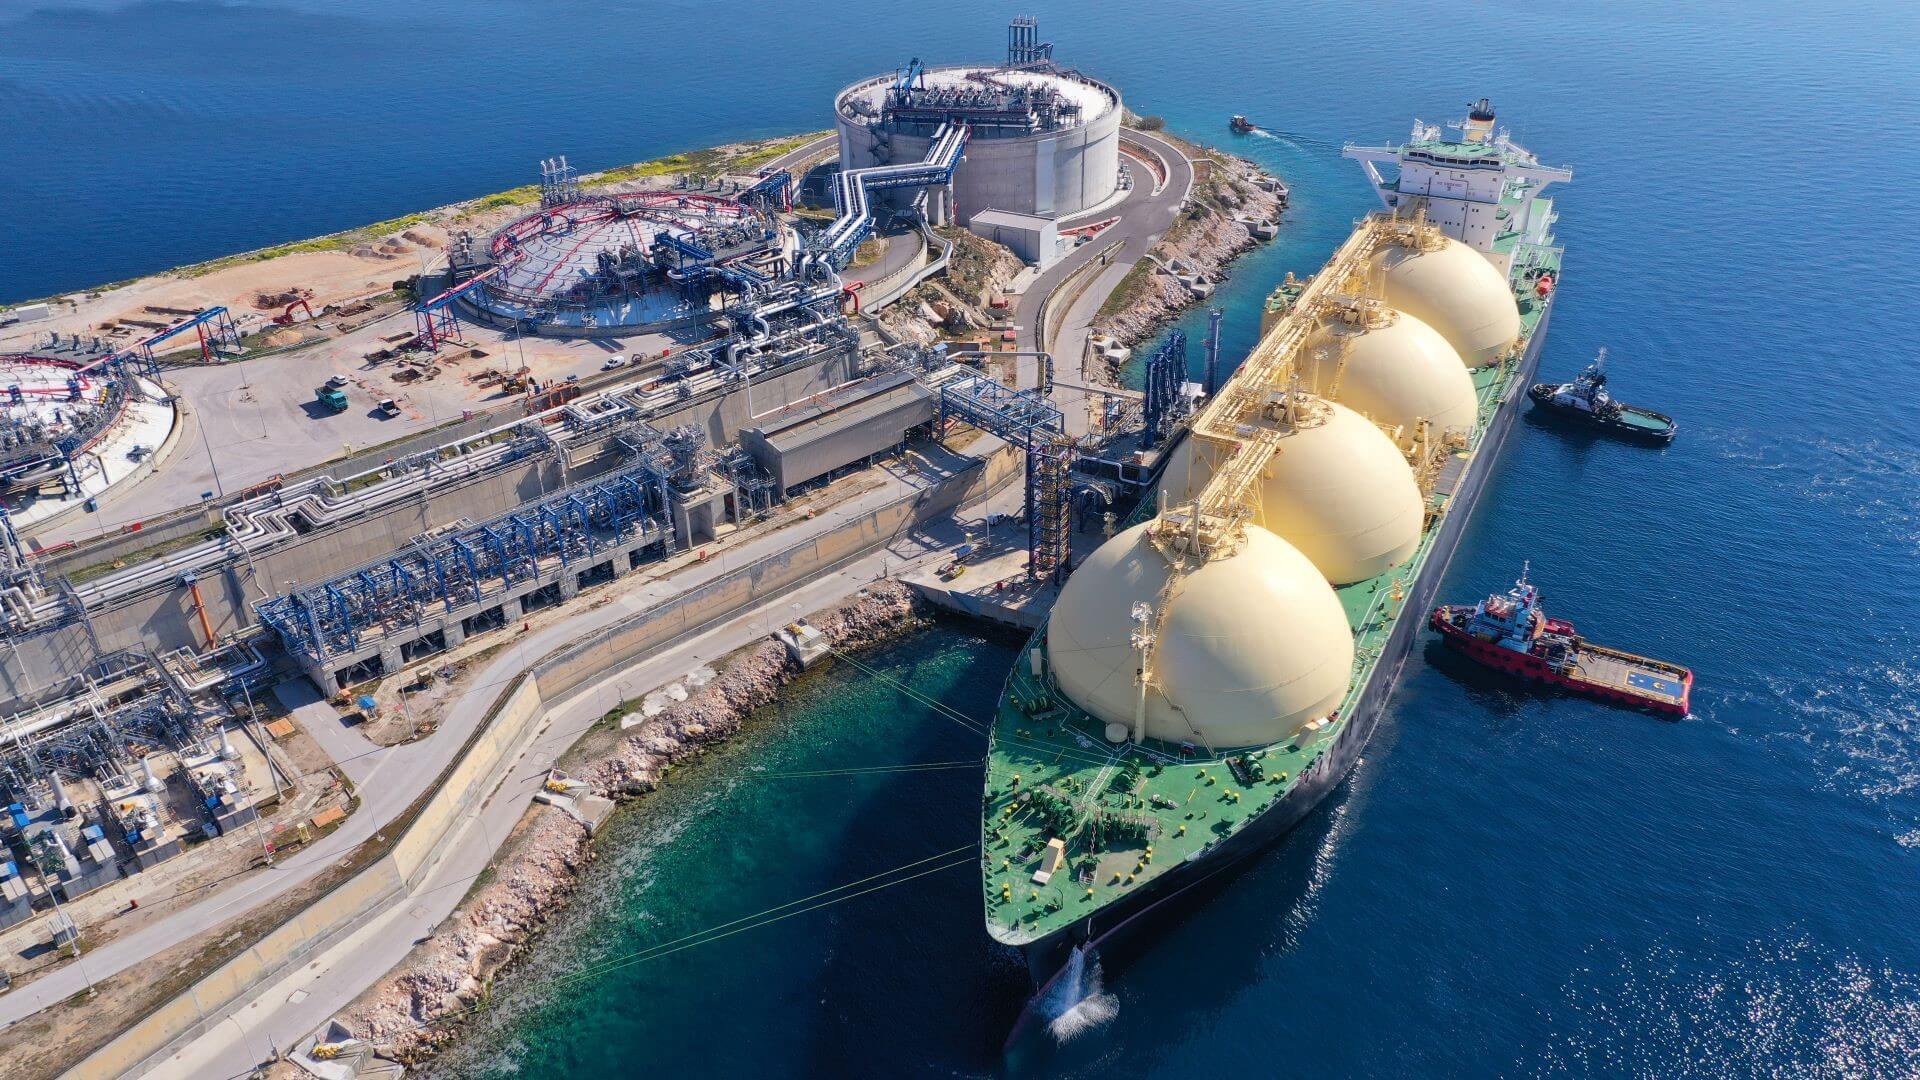 Aerial shot of LNG ship docked at terminal in Greece